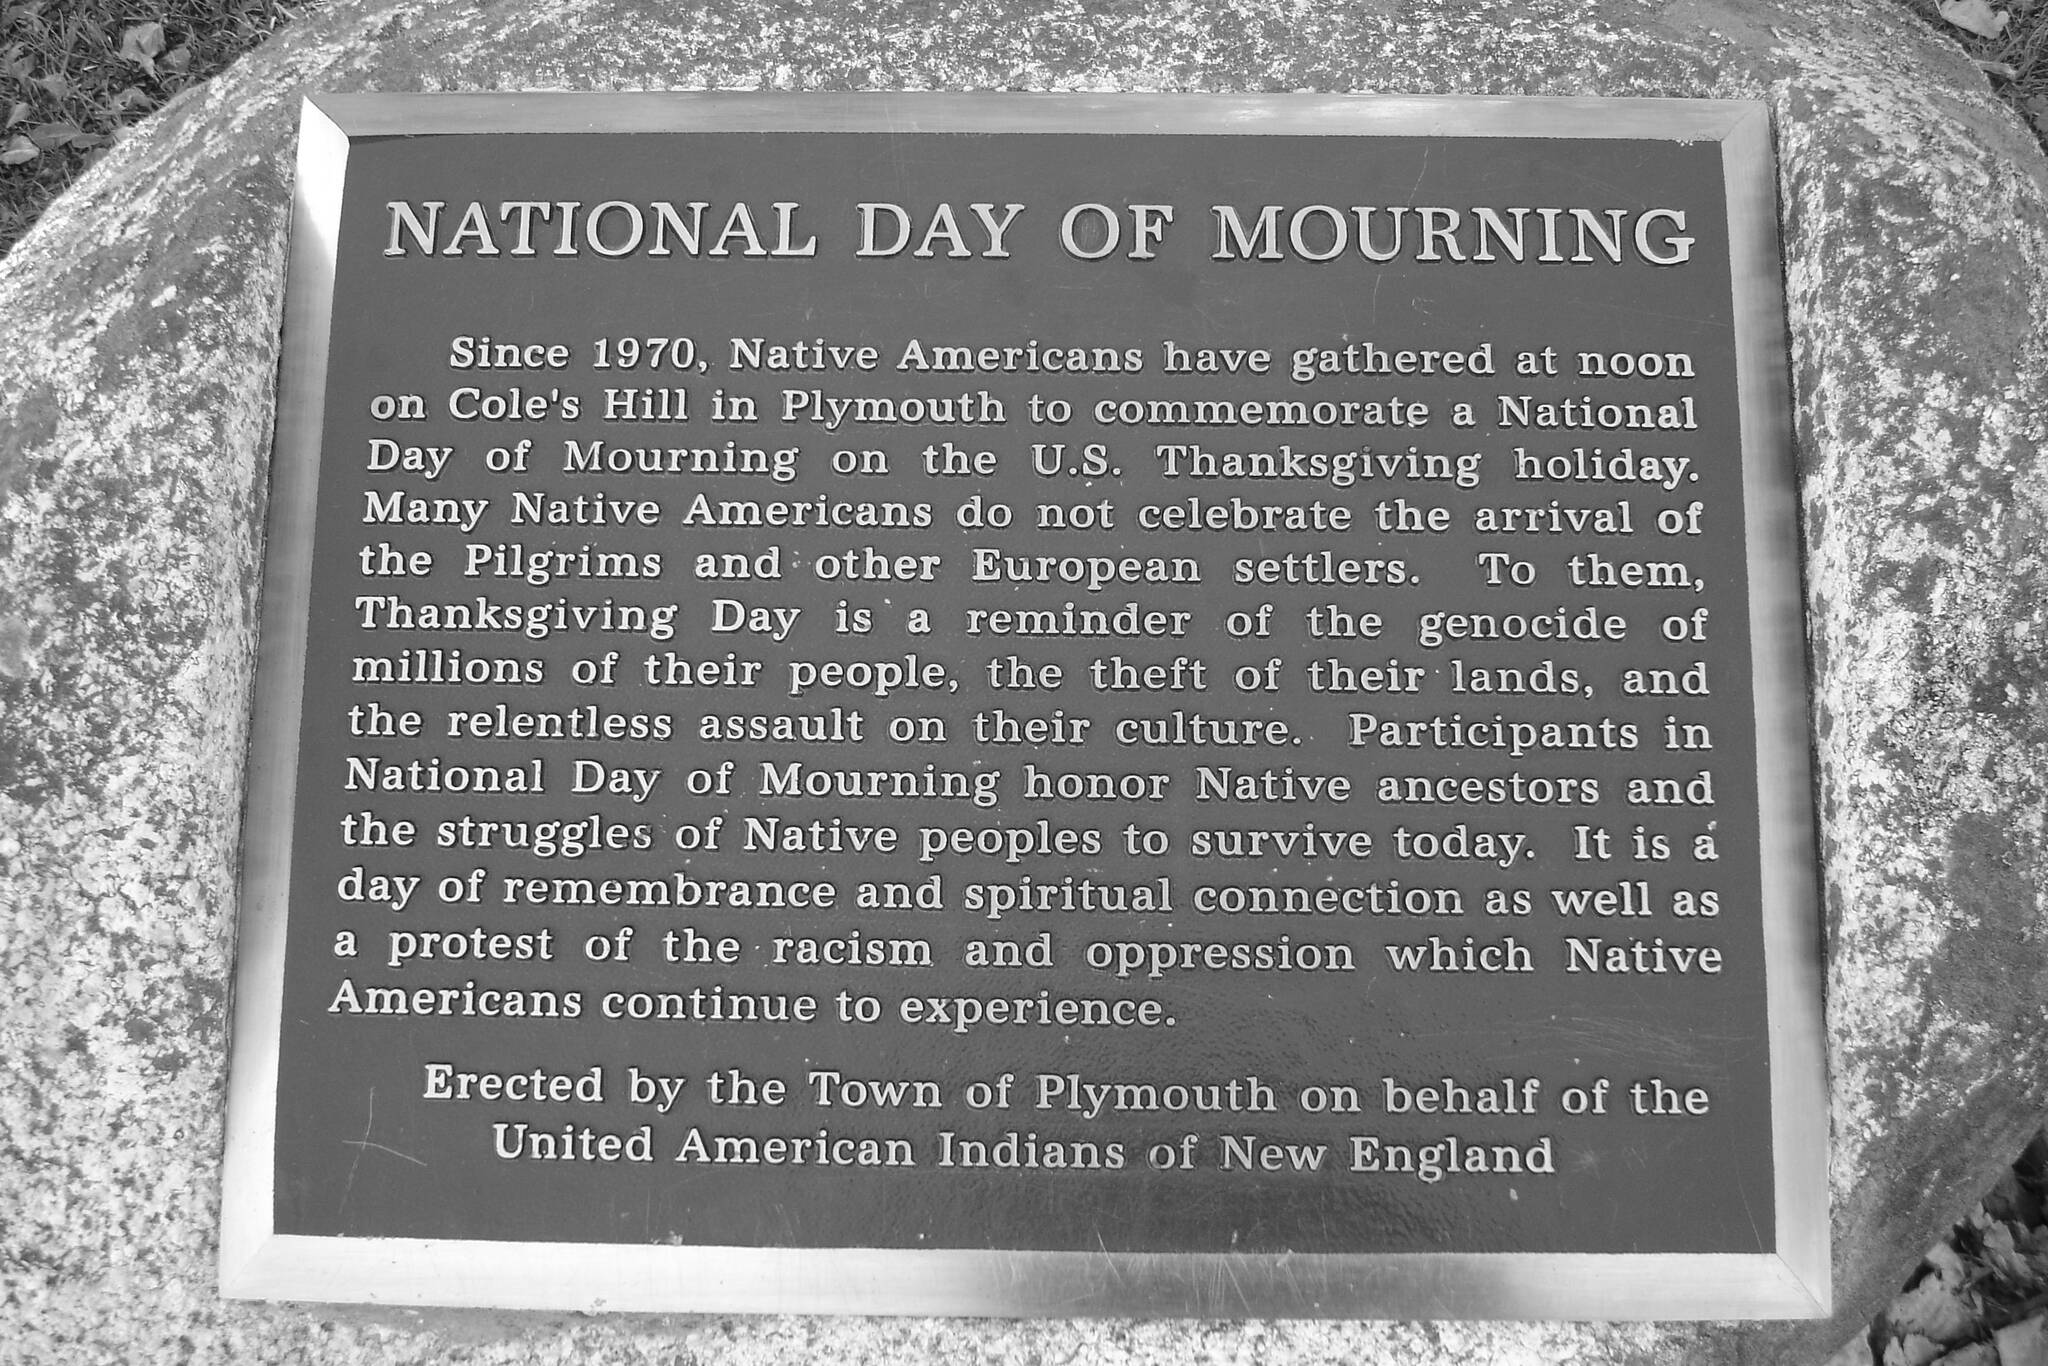 This undated photos shows National Day of Mourning plaque on Cole’s Hill in Plymouth, Mass, where since 1970 Indigenous groups have gathered to mourn the history of colonization in North America. This year marks the 400th anniversary of the traditional “First Thanksgiving ” in 1621, but for many Indigenous people, including Alaska Natives, the holiday is a somber one. (Courtesy photo / Creative commons)